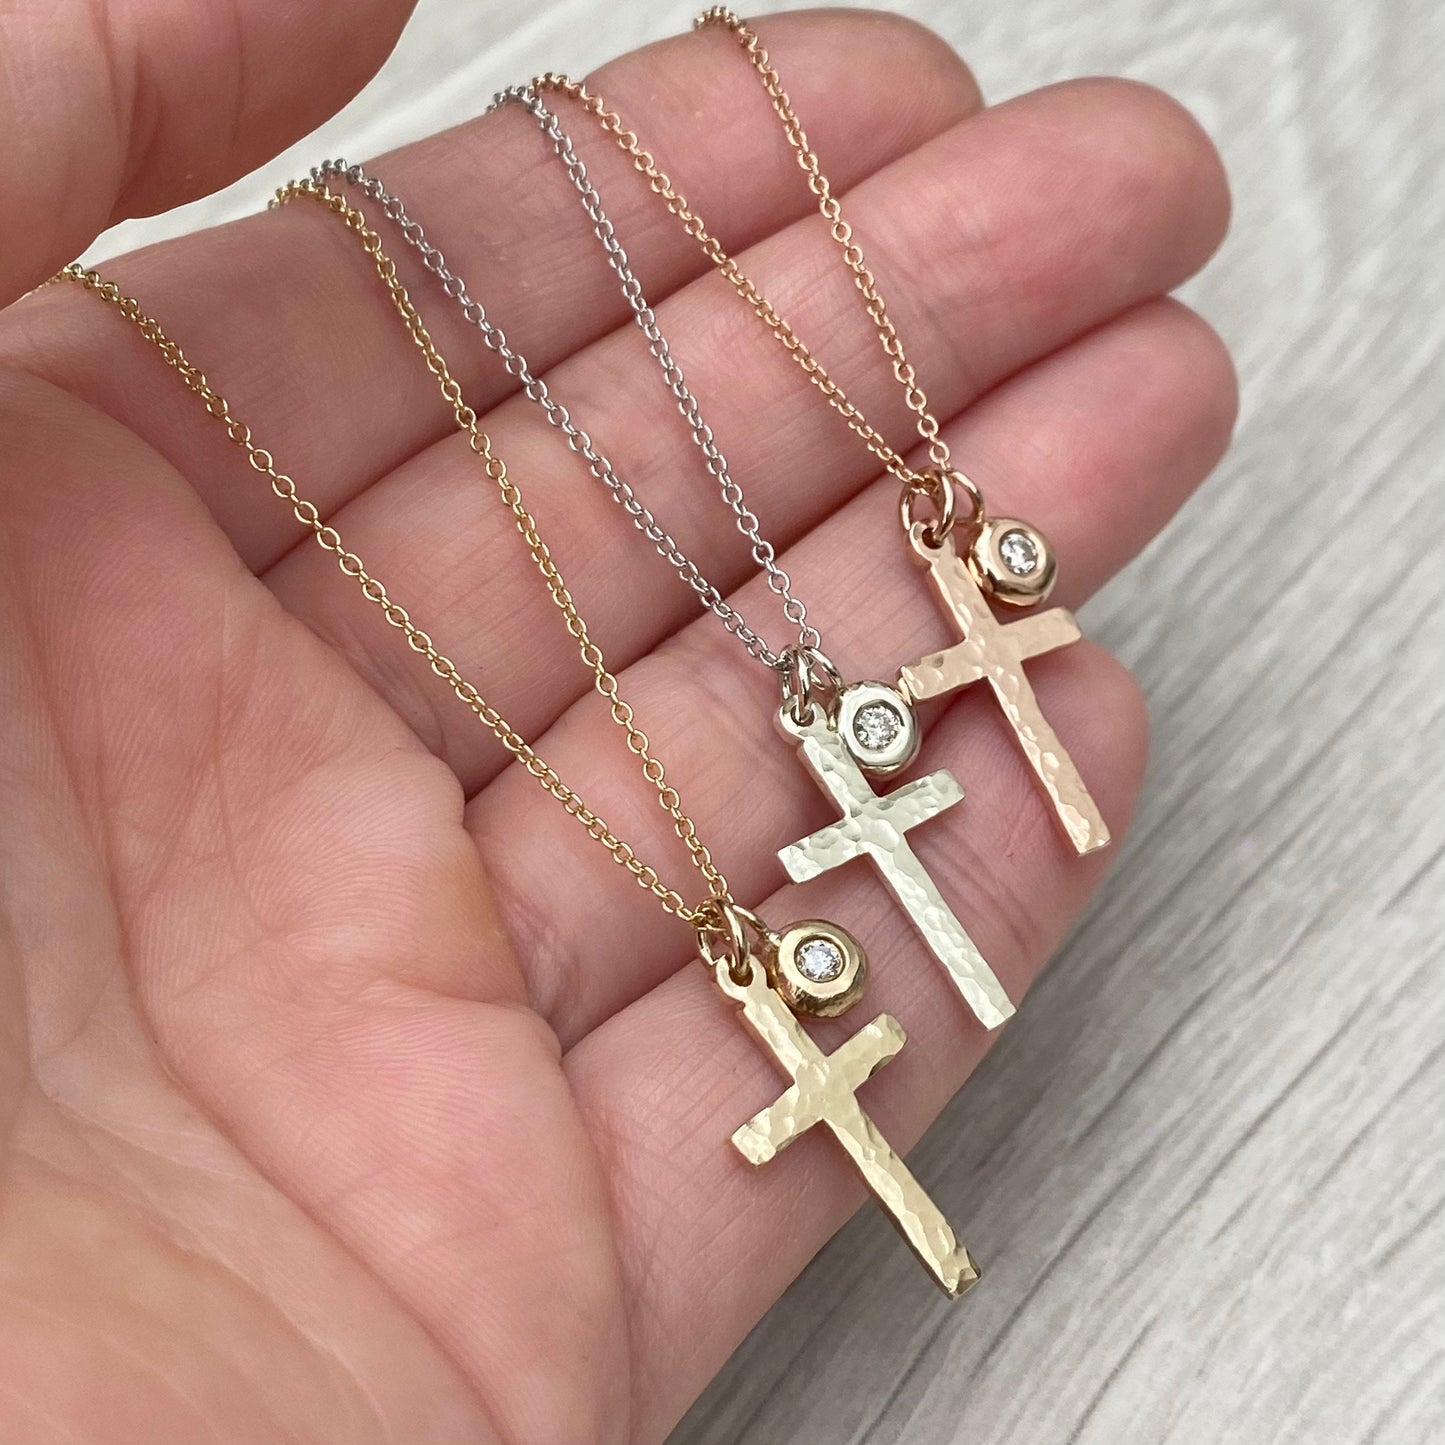 9ct solid yellow, white or rose gold hammered small cross pendant and trace chain with a diamond nugget pendant